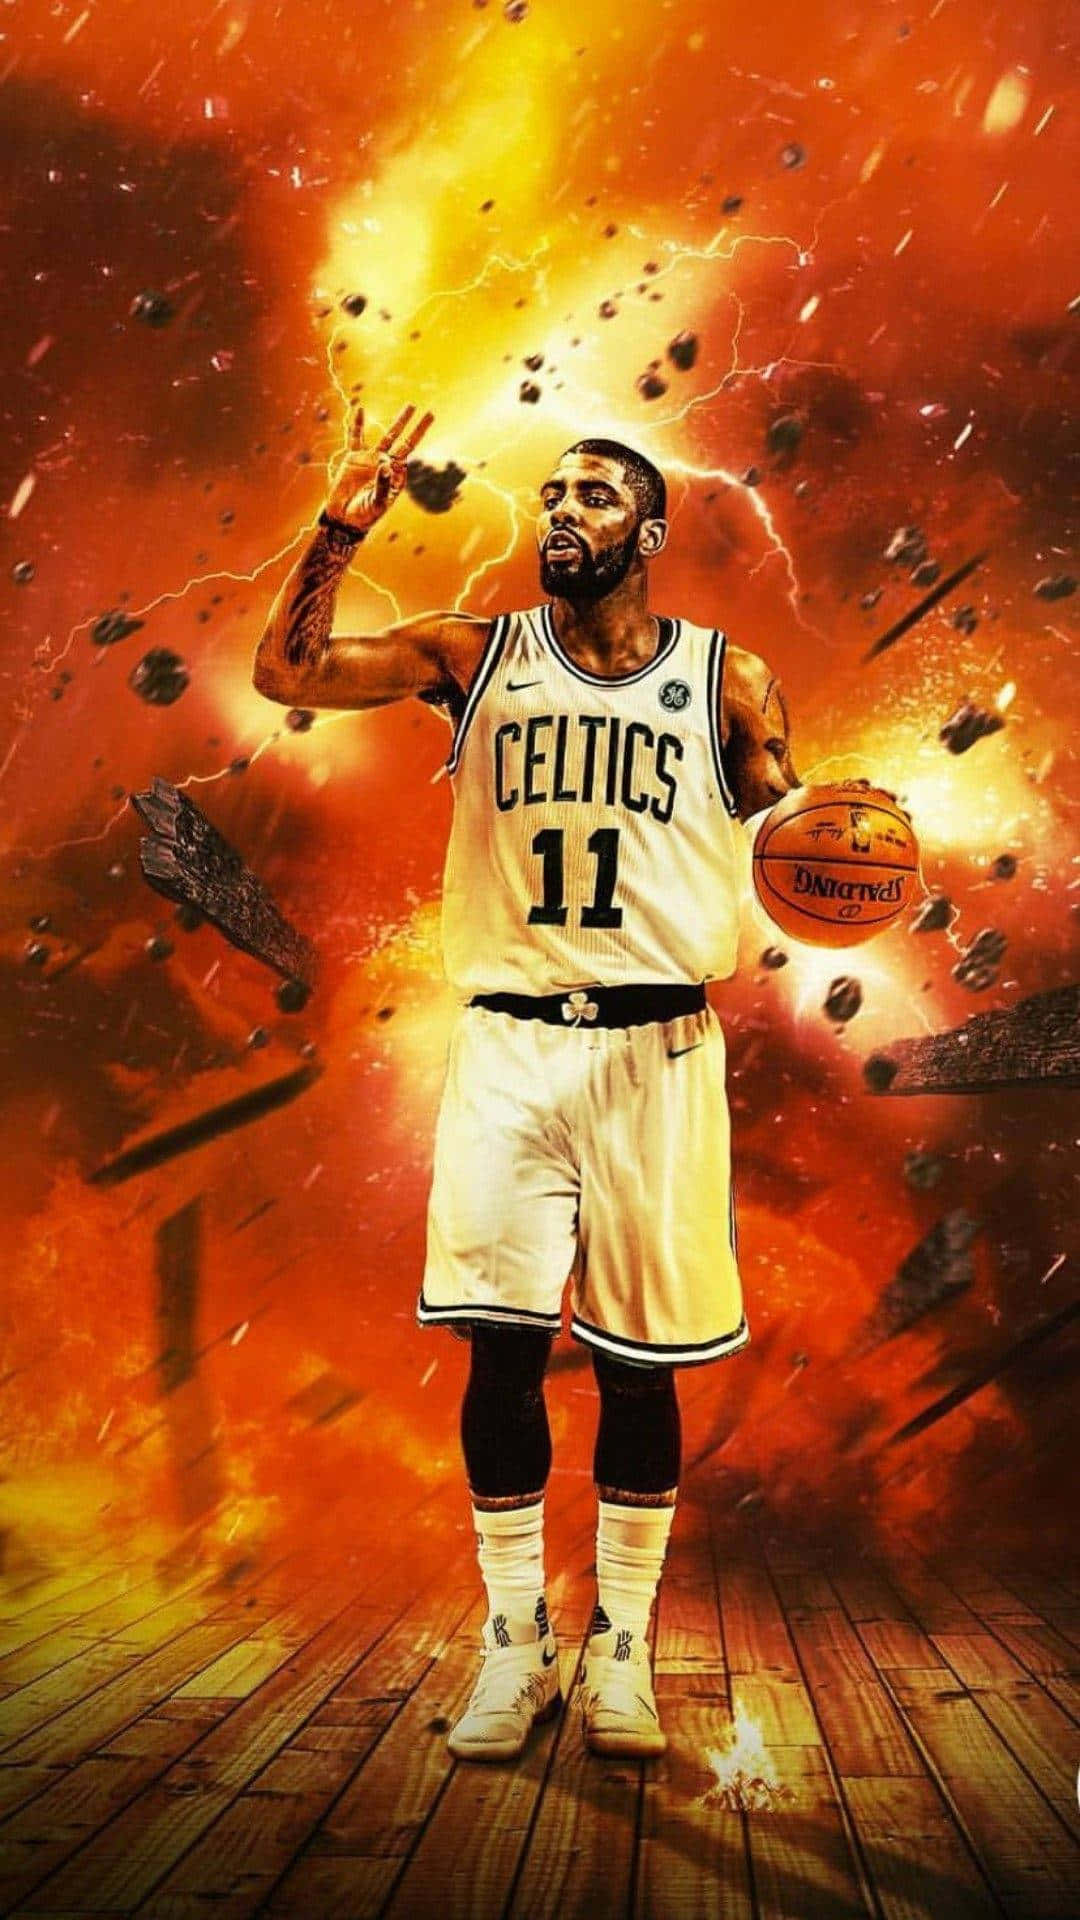 Stylish and Elegant - The Kyrie Iphone Wallpaper